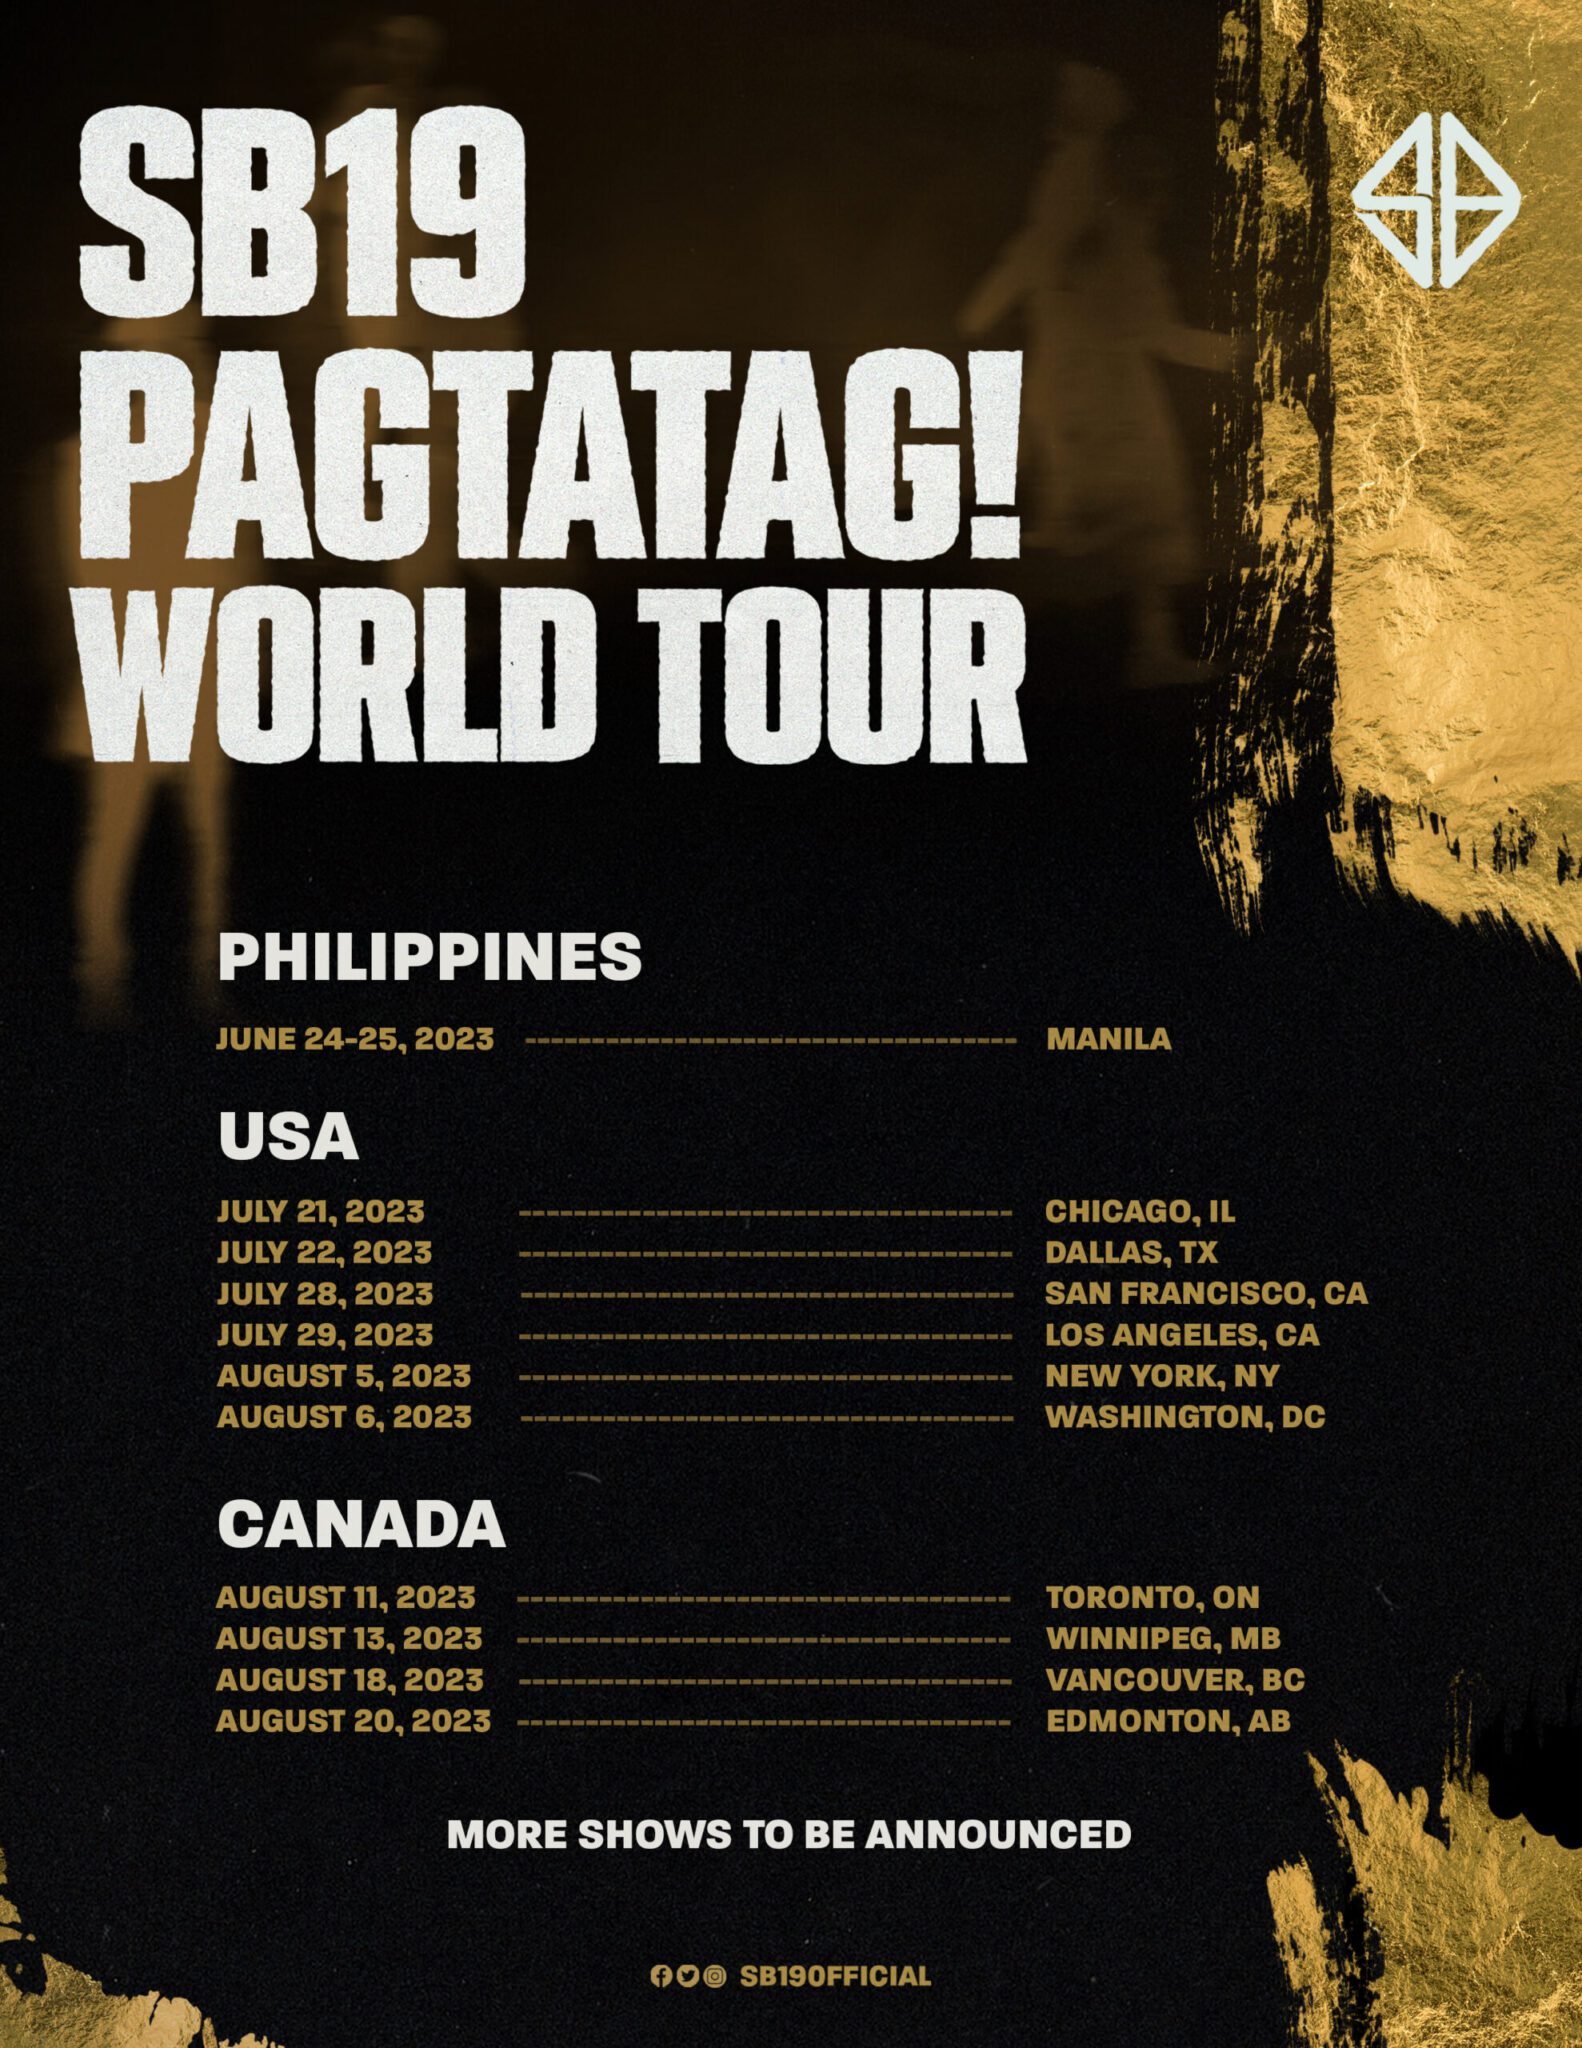 SB19 Ushers New Era with "PAGTATAG!" and World Tour